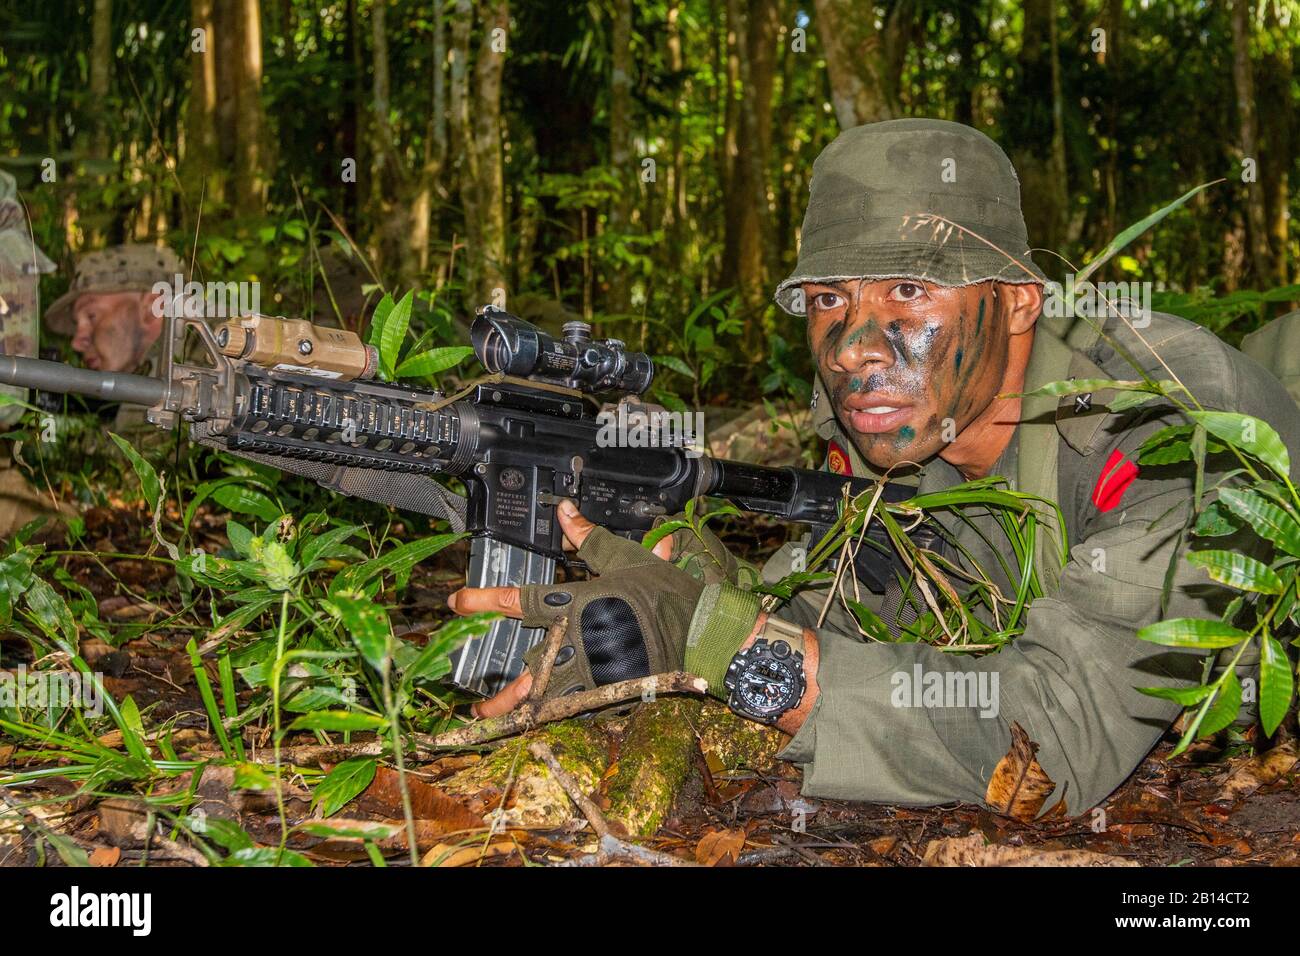 Fijian Lieutenant Amania Kuru, who serves as a platoon commander with Golf Company, 3rd Battalion, Fiji Infantry Regiment, leads a small unit during a Jungle Situational Training Exercise in Labasa, Fiji, August 1, 2019. The training is a portion of Pacific Pathways' Exercise Cartwheel 2019, which aims to strengthen relationships through bilateral military-to-military training, with the Republic of Fiji Military Forces. The exercise builds expeditionary readiness and interoperability, increasing capabilities to face crisis contingencies by developing and stressing units at the highest training Stock Photo